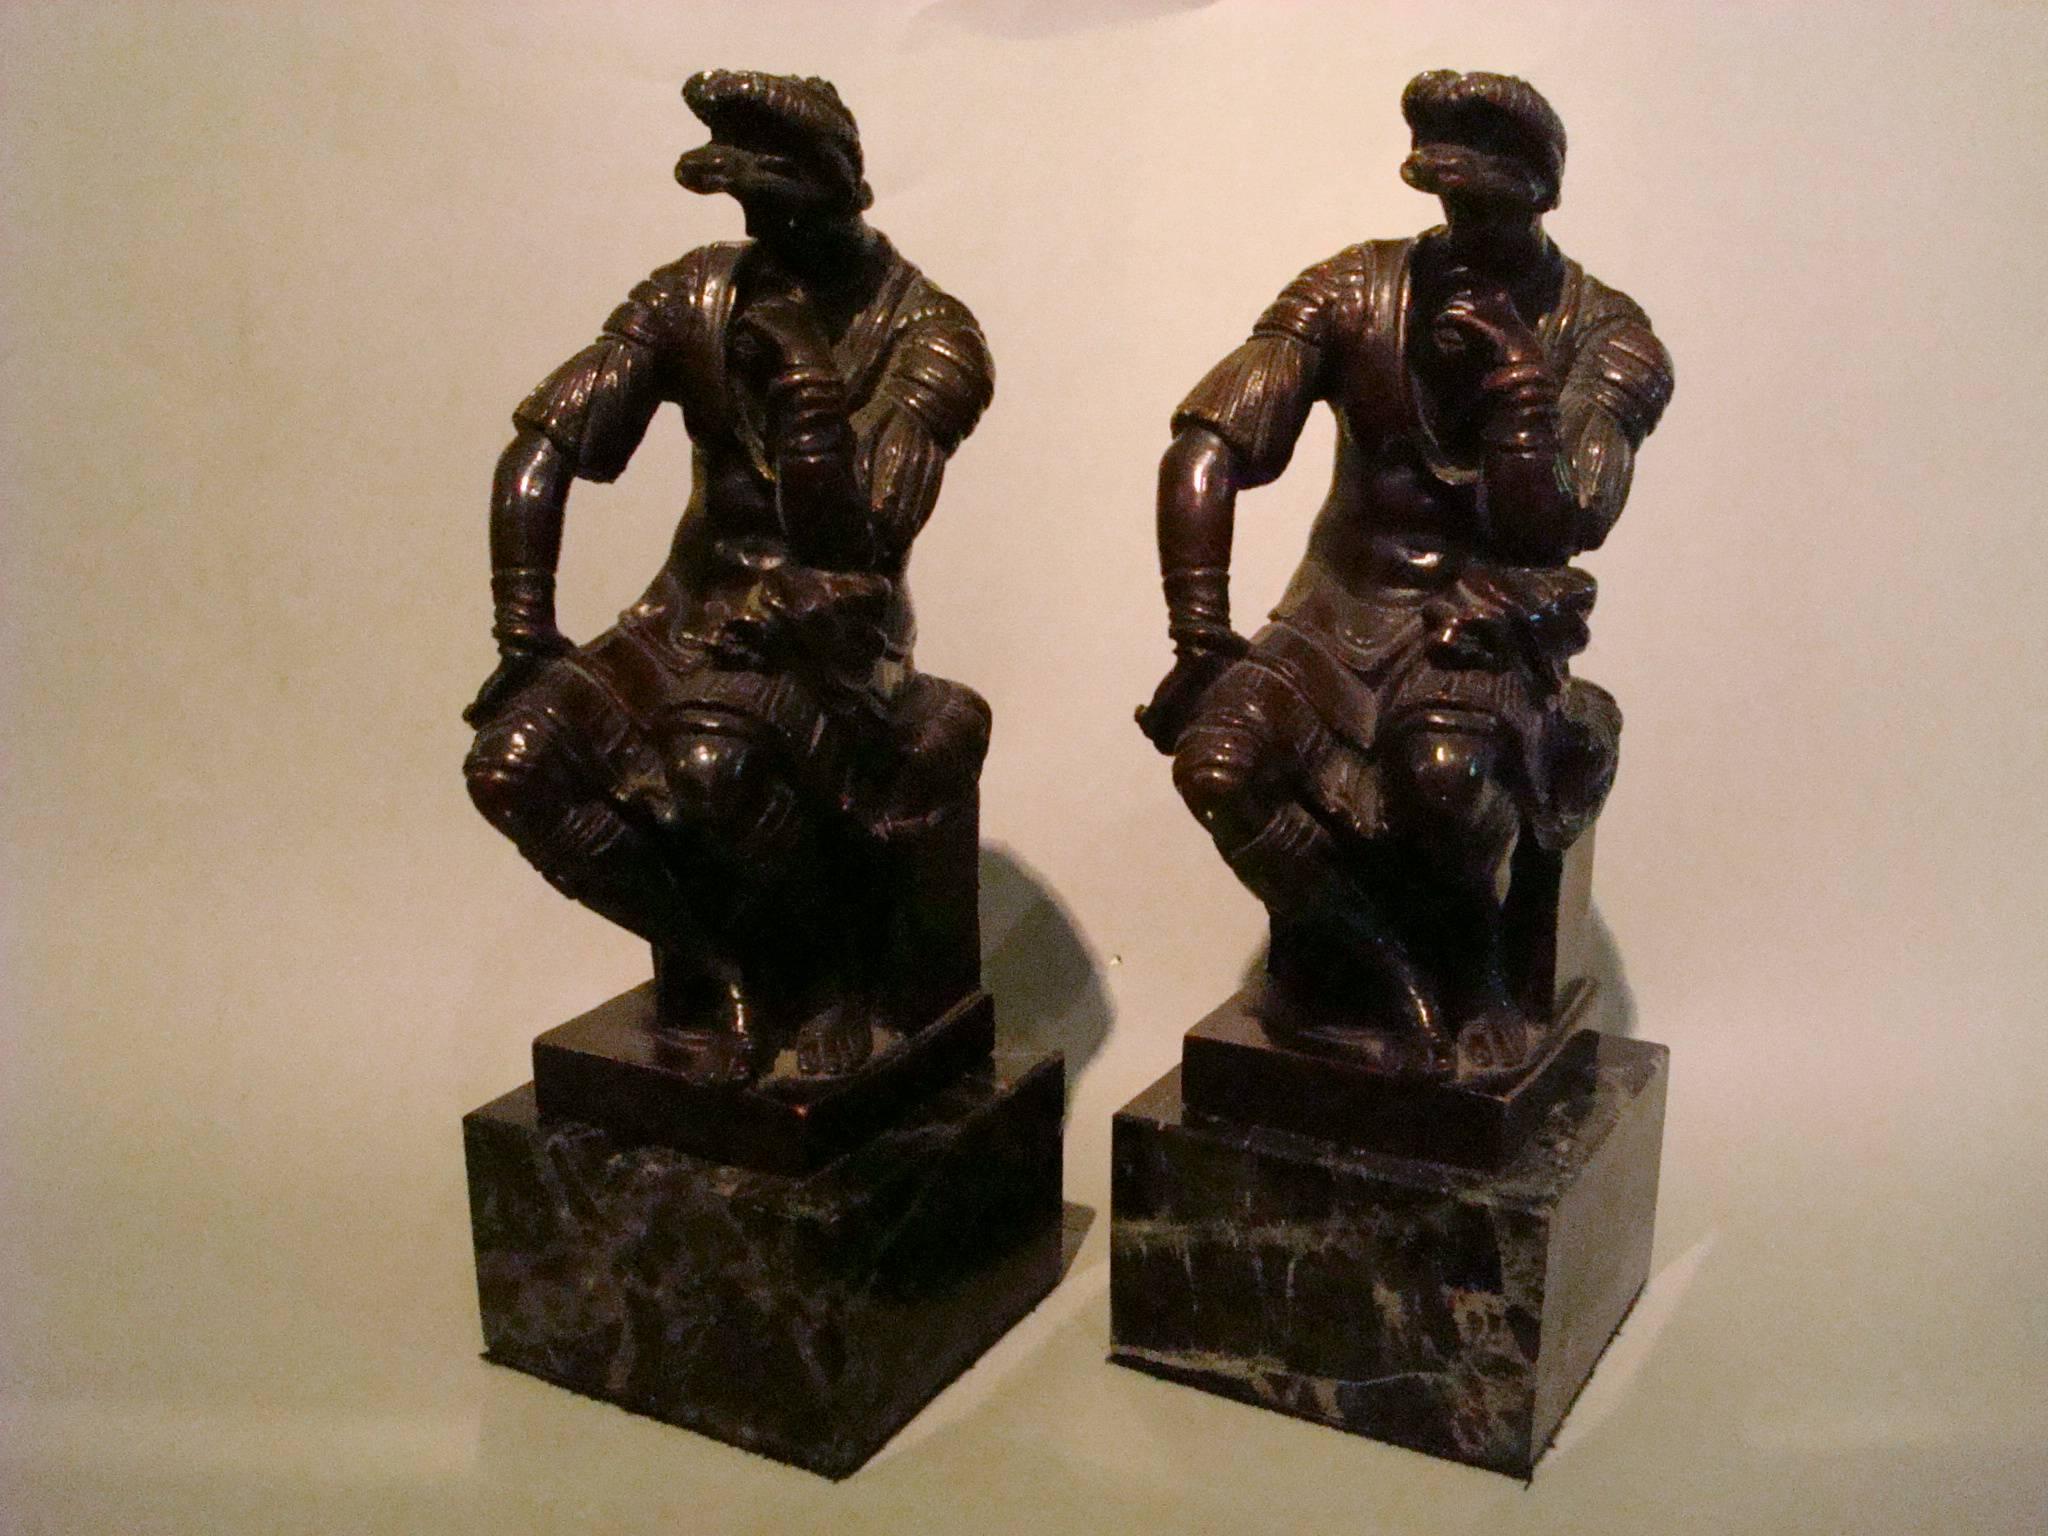 This fine work Bronze Bookends made after the original statue by Michelangelo at the tomb of Lorenzo Di Medici, Duke of Urbino, Medici Chapel of San Lorenzo, Firenze. Medici is cast as a Roman General in repose on a square pedestal, his head